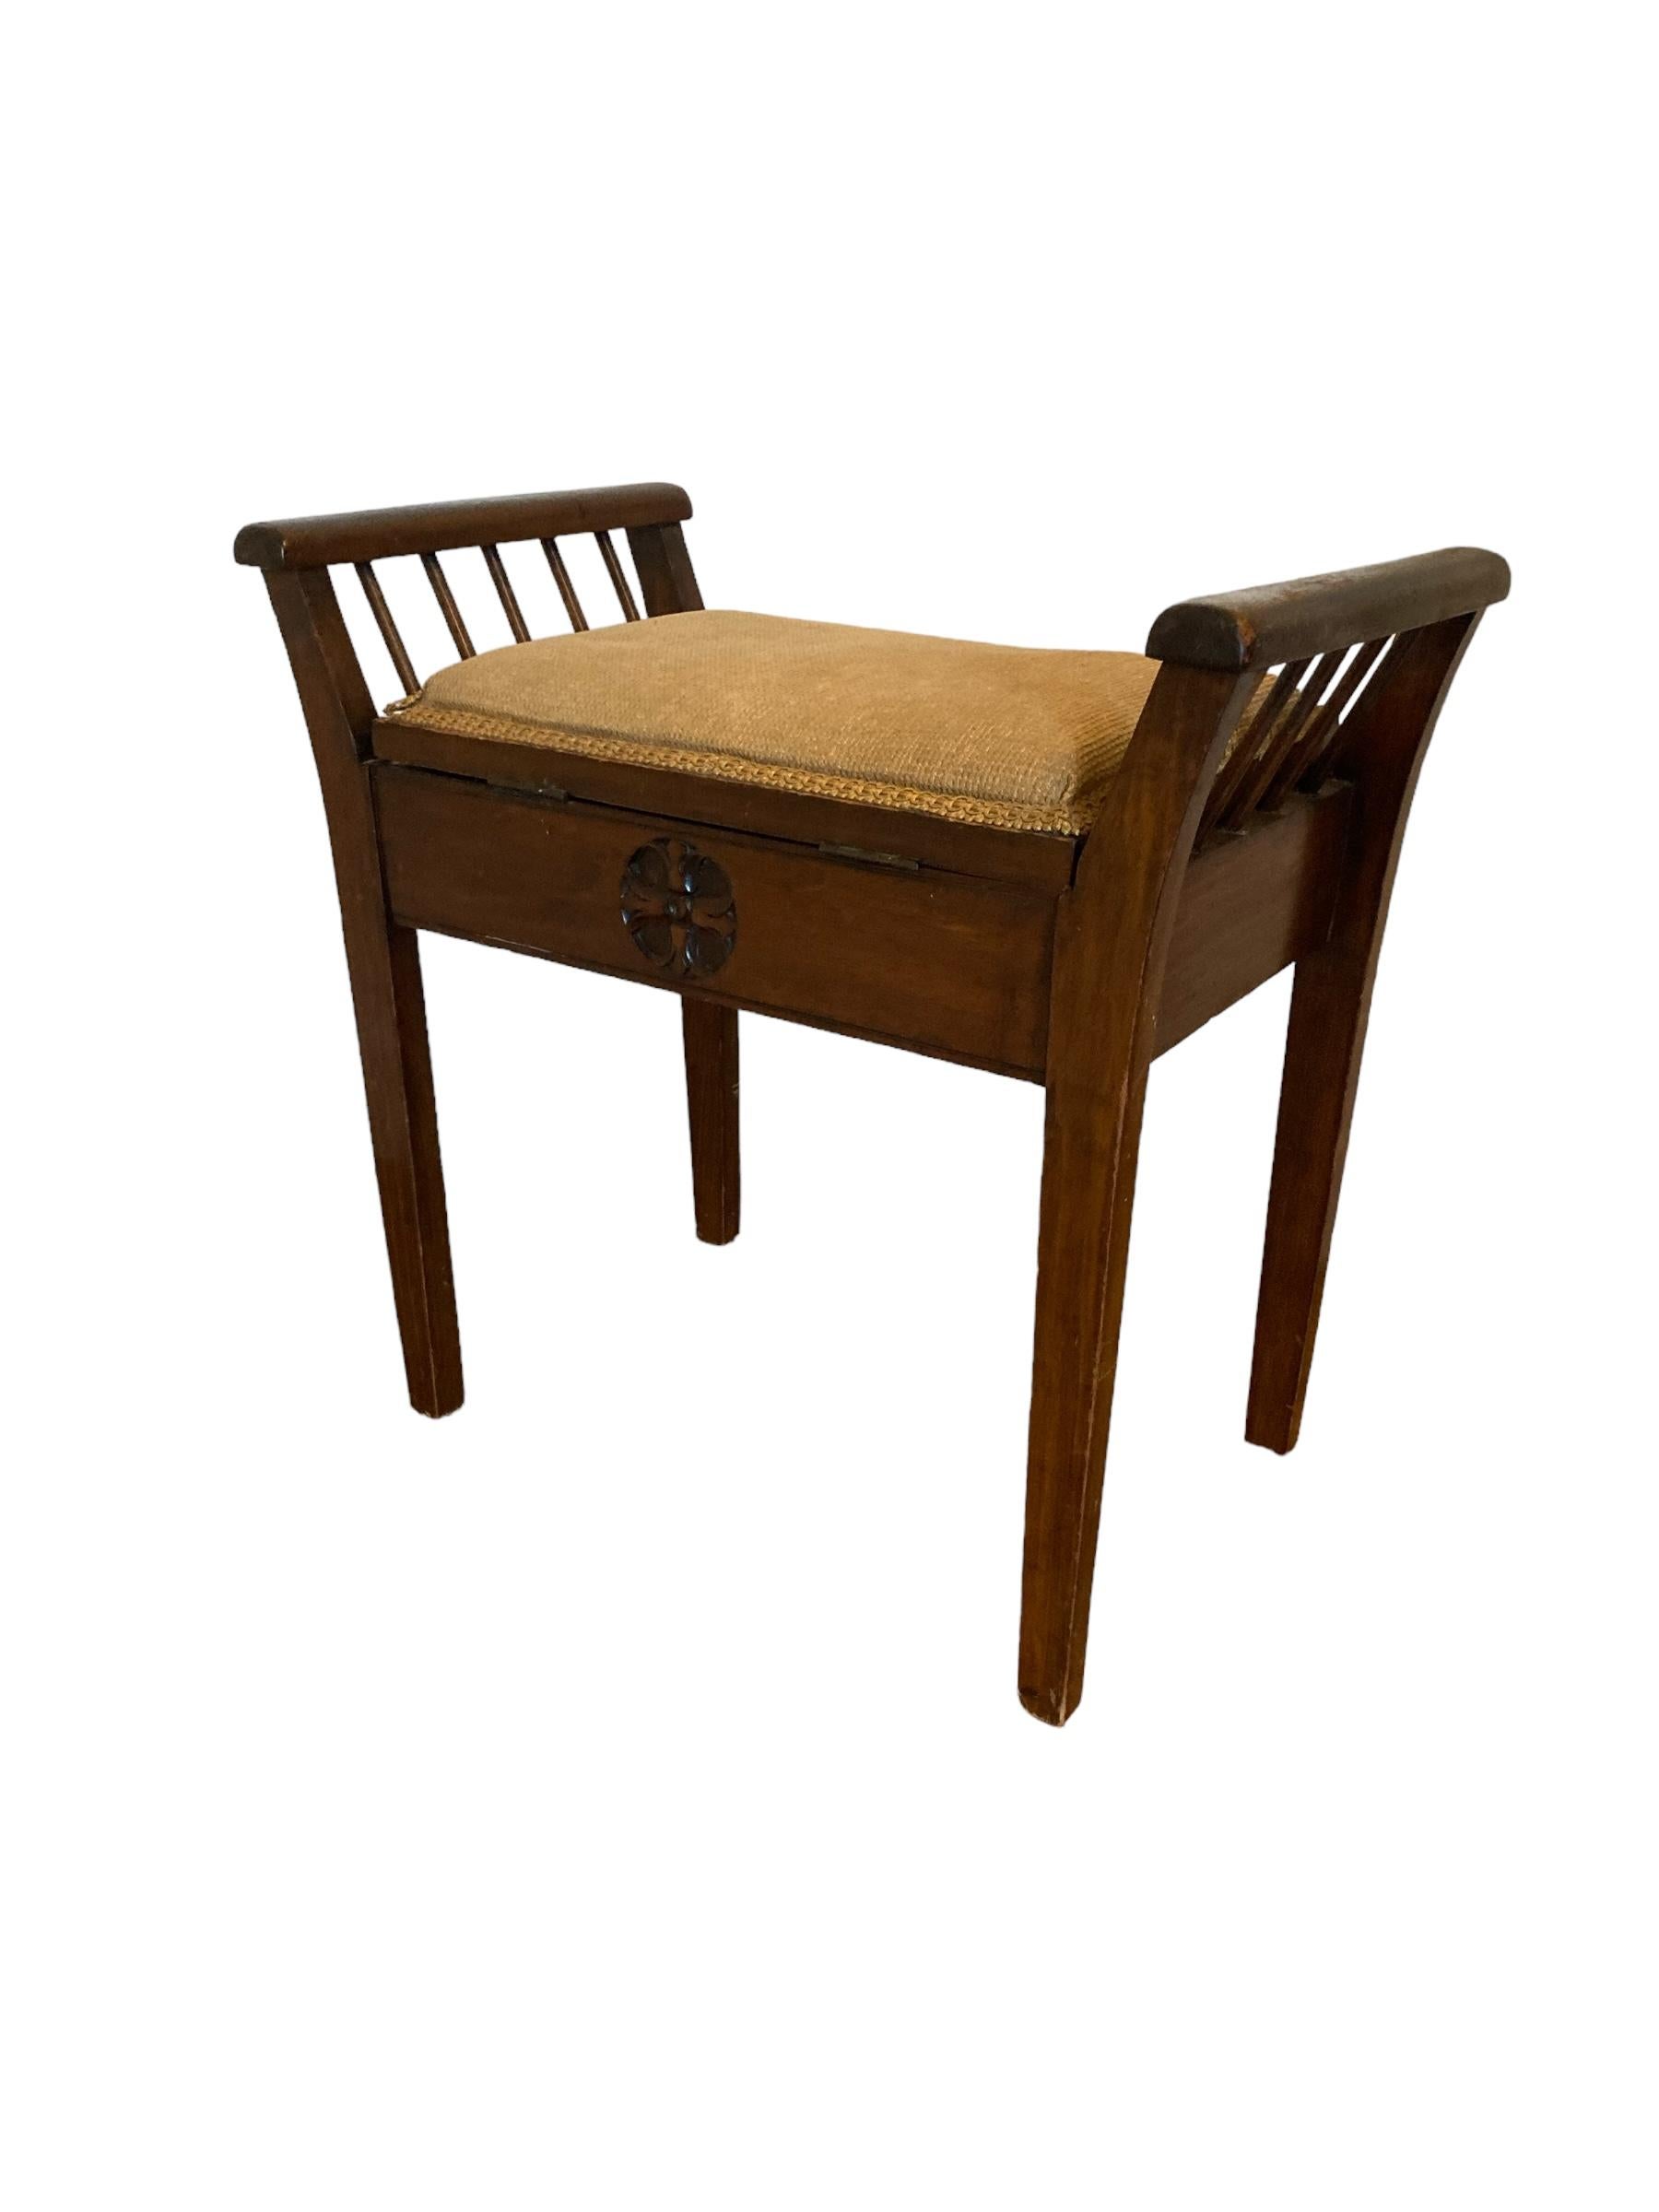 Edwardian Mahogany Piano Stool with Carving, probably used in a Church early 1900's. Beautifully made, solid seat with hinged top lid for storage. A classic piece for its' time.
H: 55cm, W: 57cm D: 33cm Seat H: 47cm